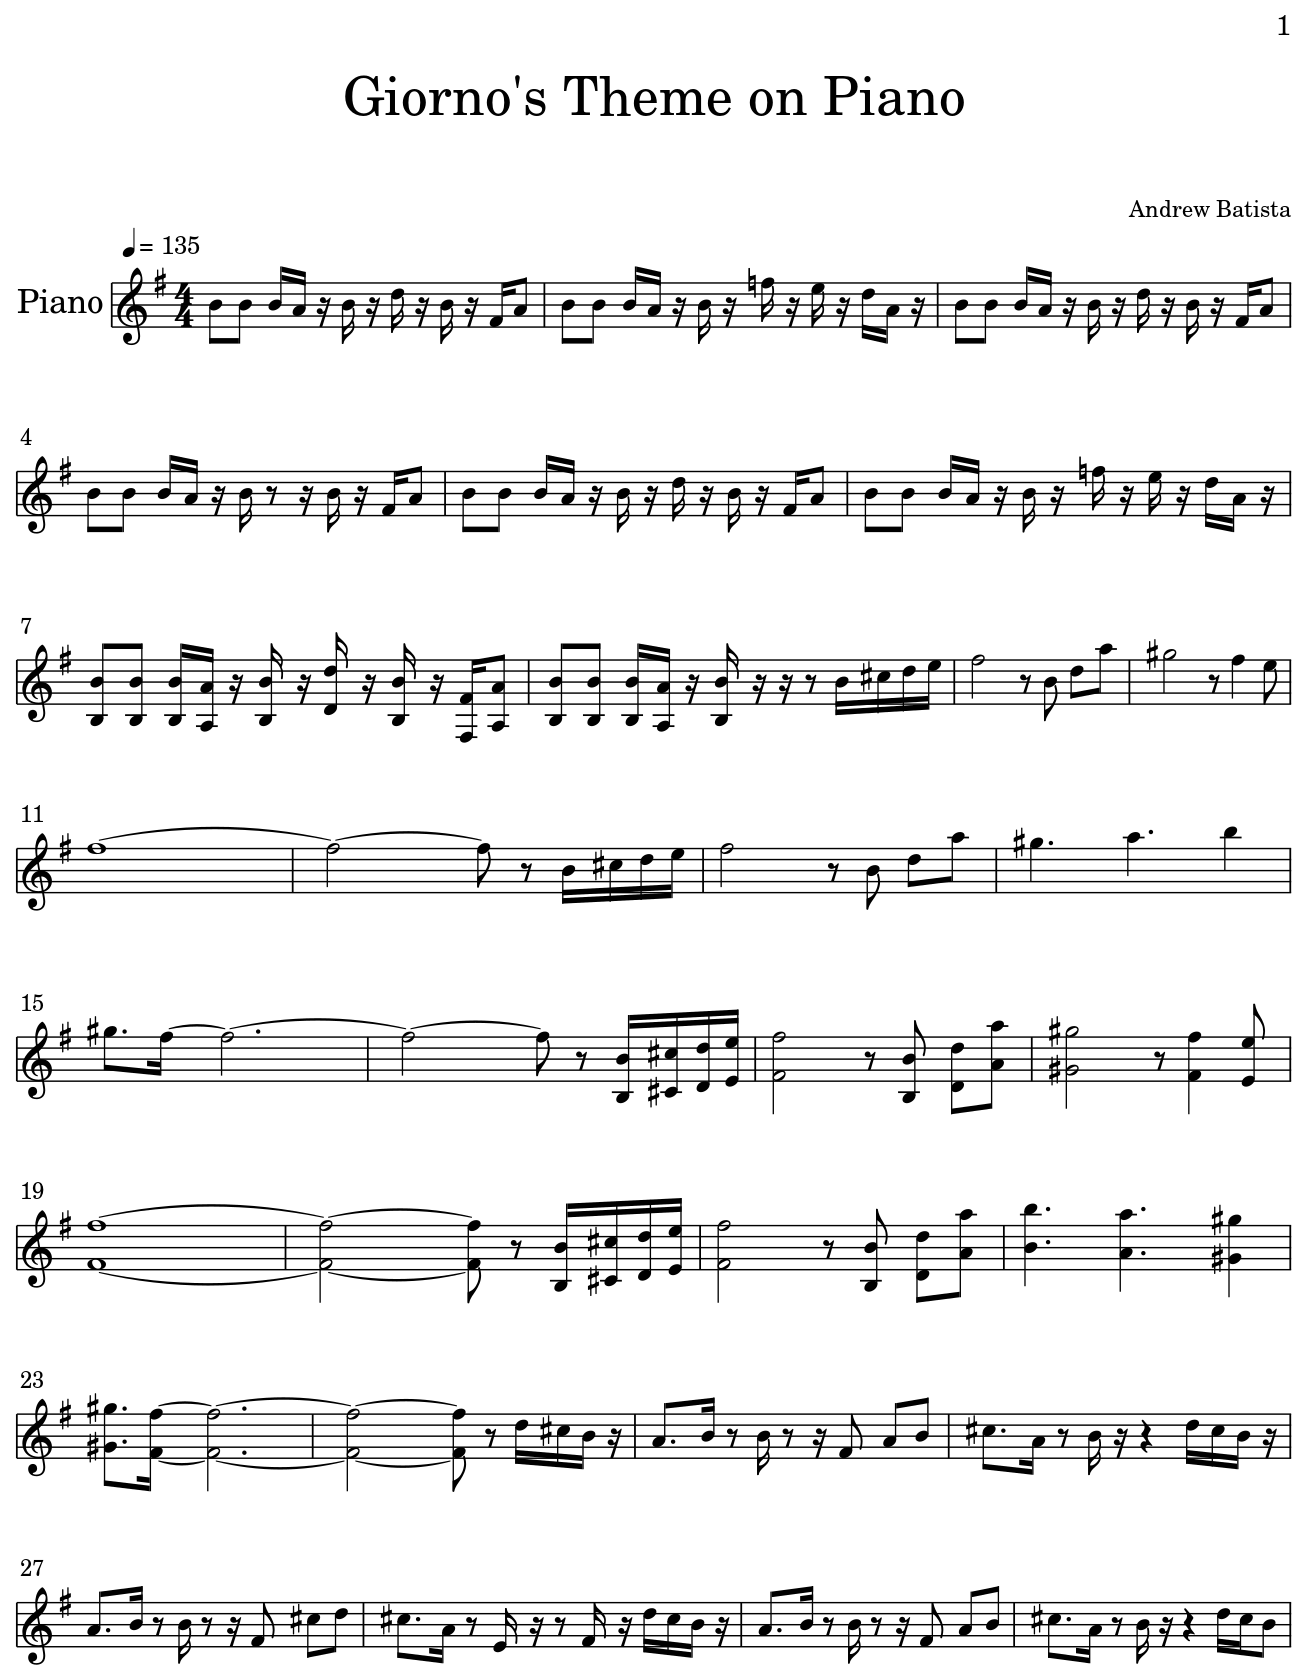 Giorno's Theme on Piano - Sheet music for Piano